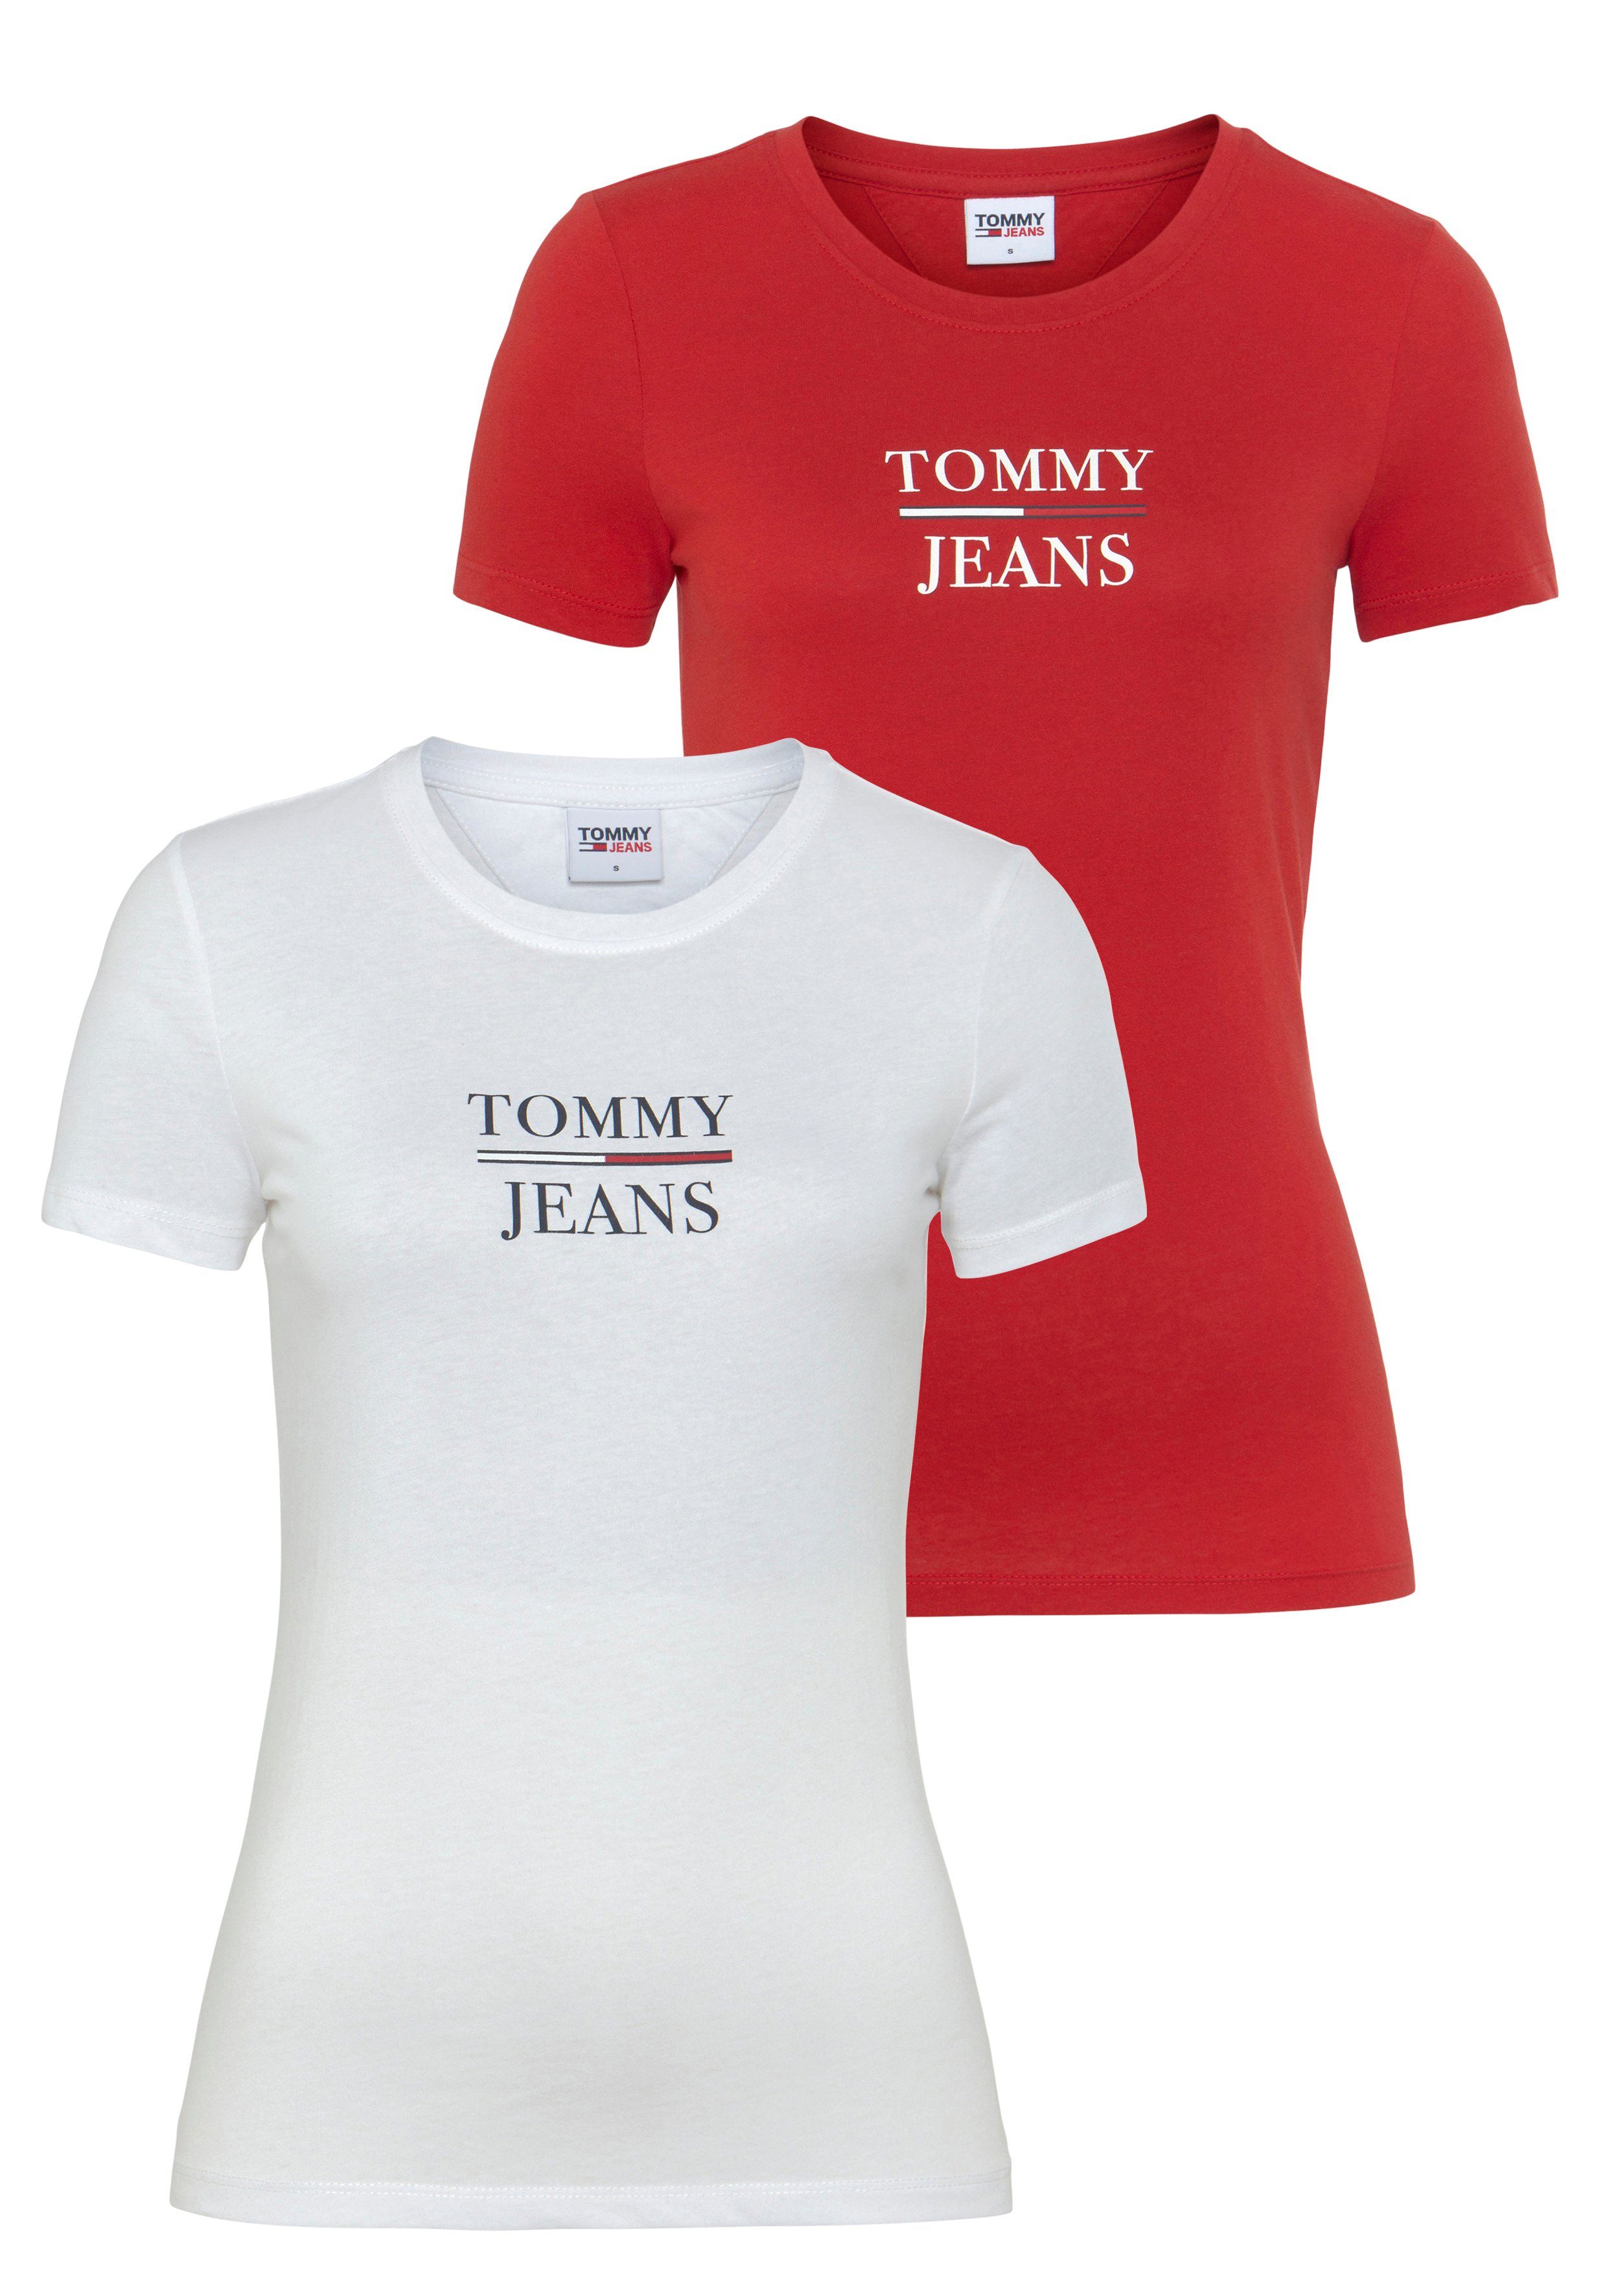 T Tommy TJW 2er-Pack) ESS SS 2PACK Skinny TOMMY (Packung, T-Shirt Jeans